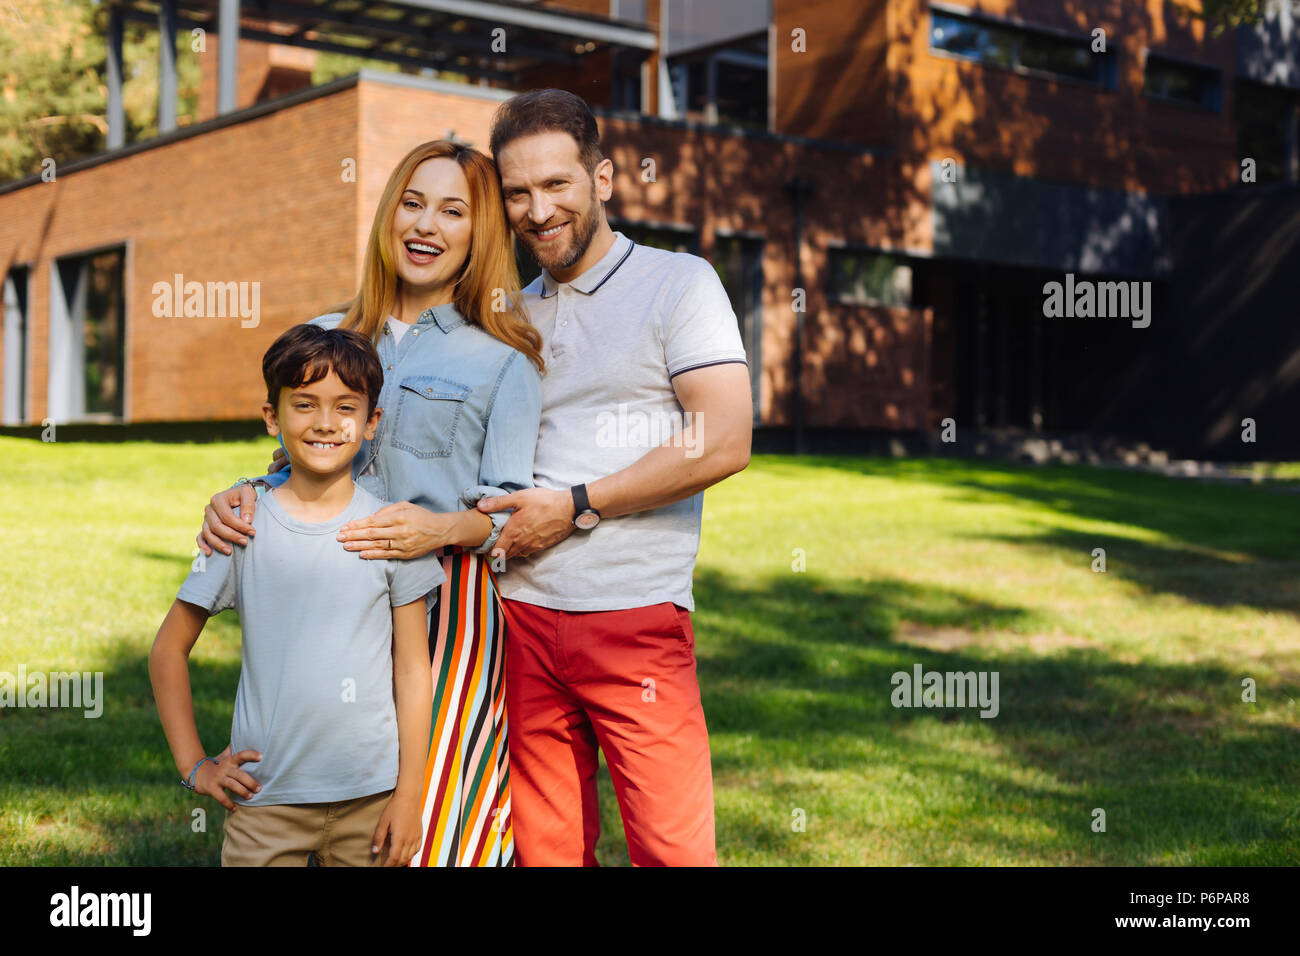 Gleeful parents standing with their son Stock Photo